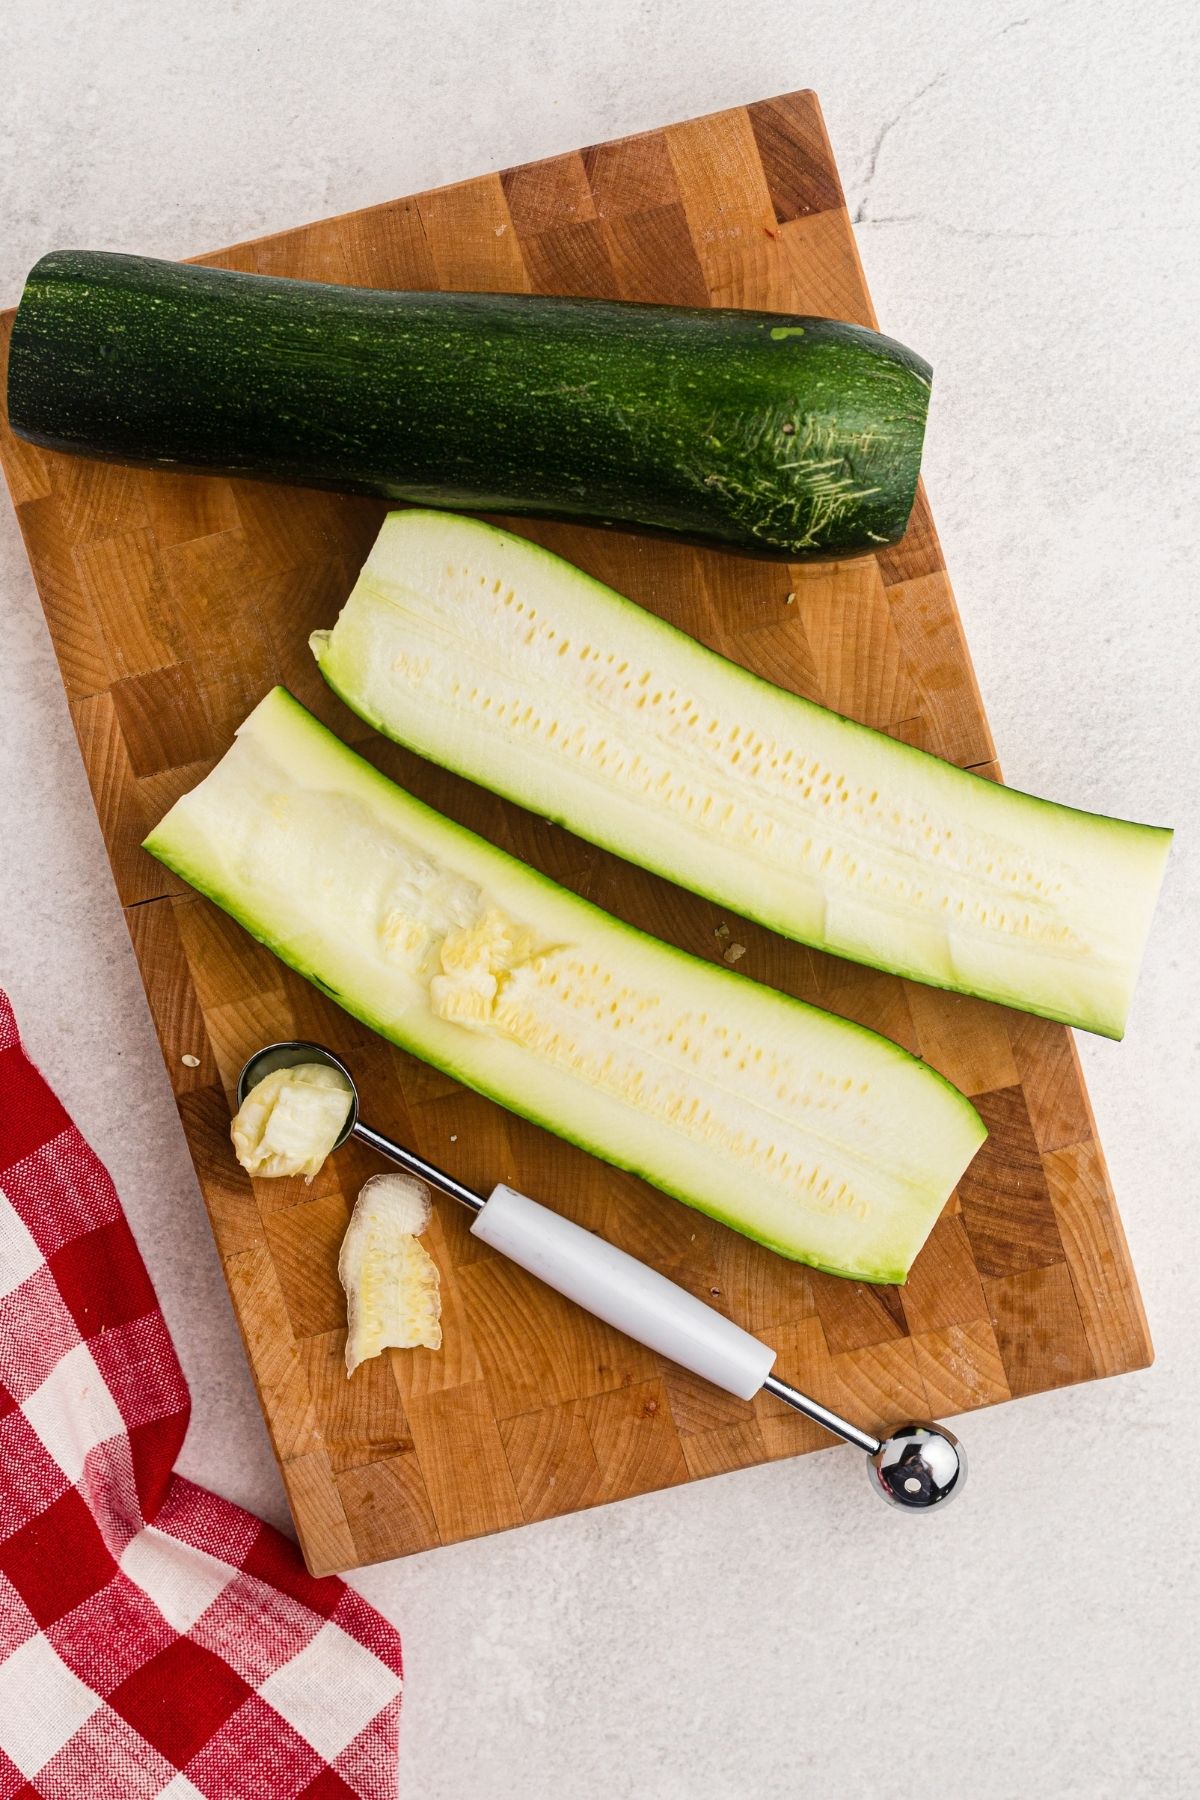 Zucchini sliced in half and then scooped out with melon baller on a cutting board